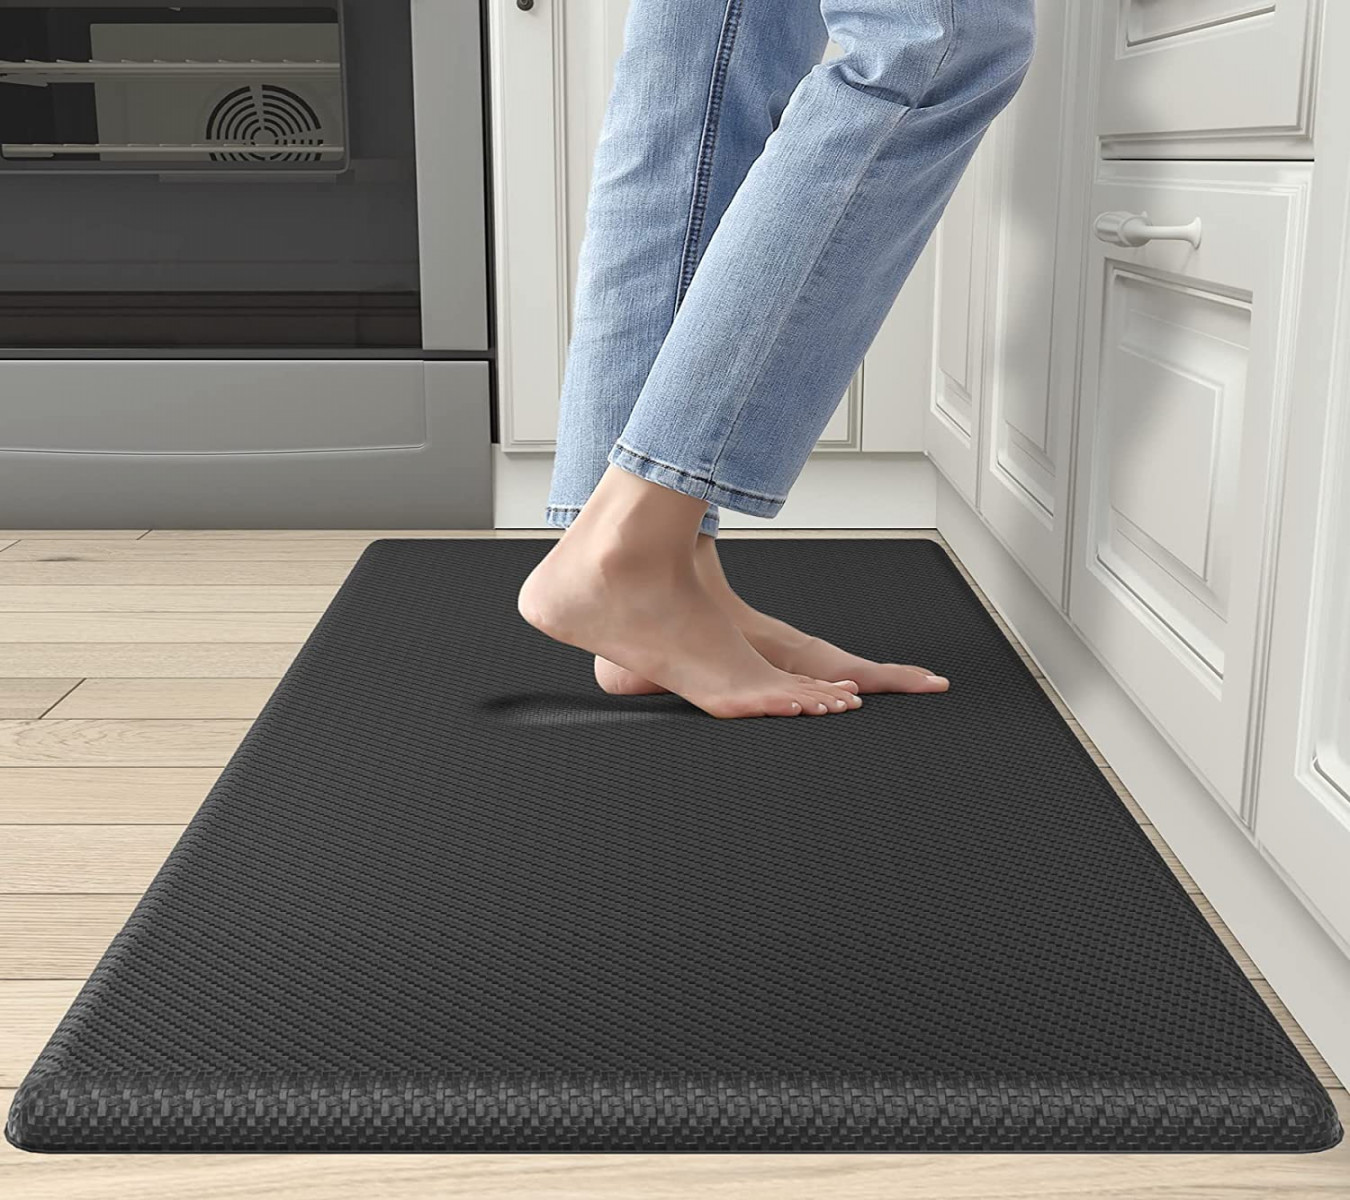 DEXI Anti-Fatigue Kitchen Mat, / Inch Thick Stain Resistant Padded Memory  Foam Floor Comfort Mat for Home, Garage and Office, Standing Desk, 9 x